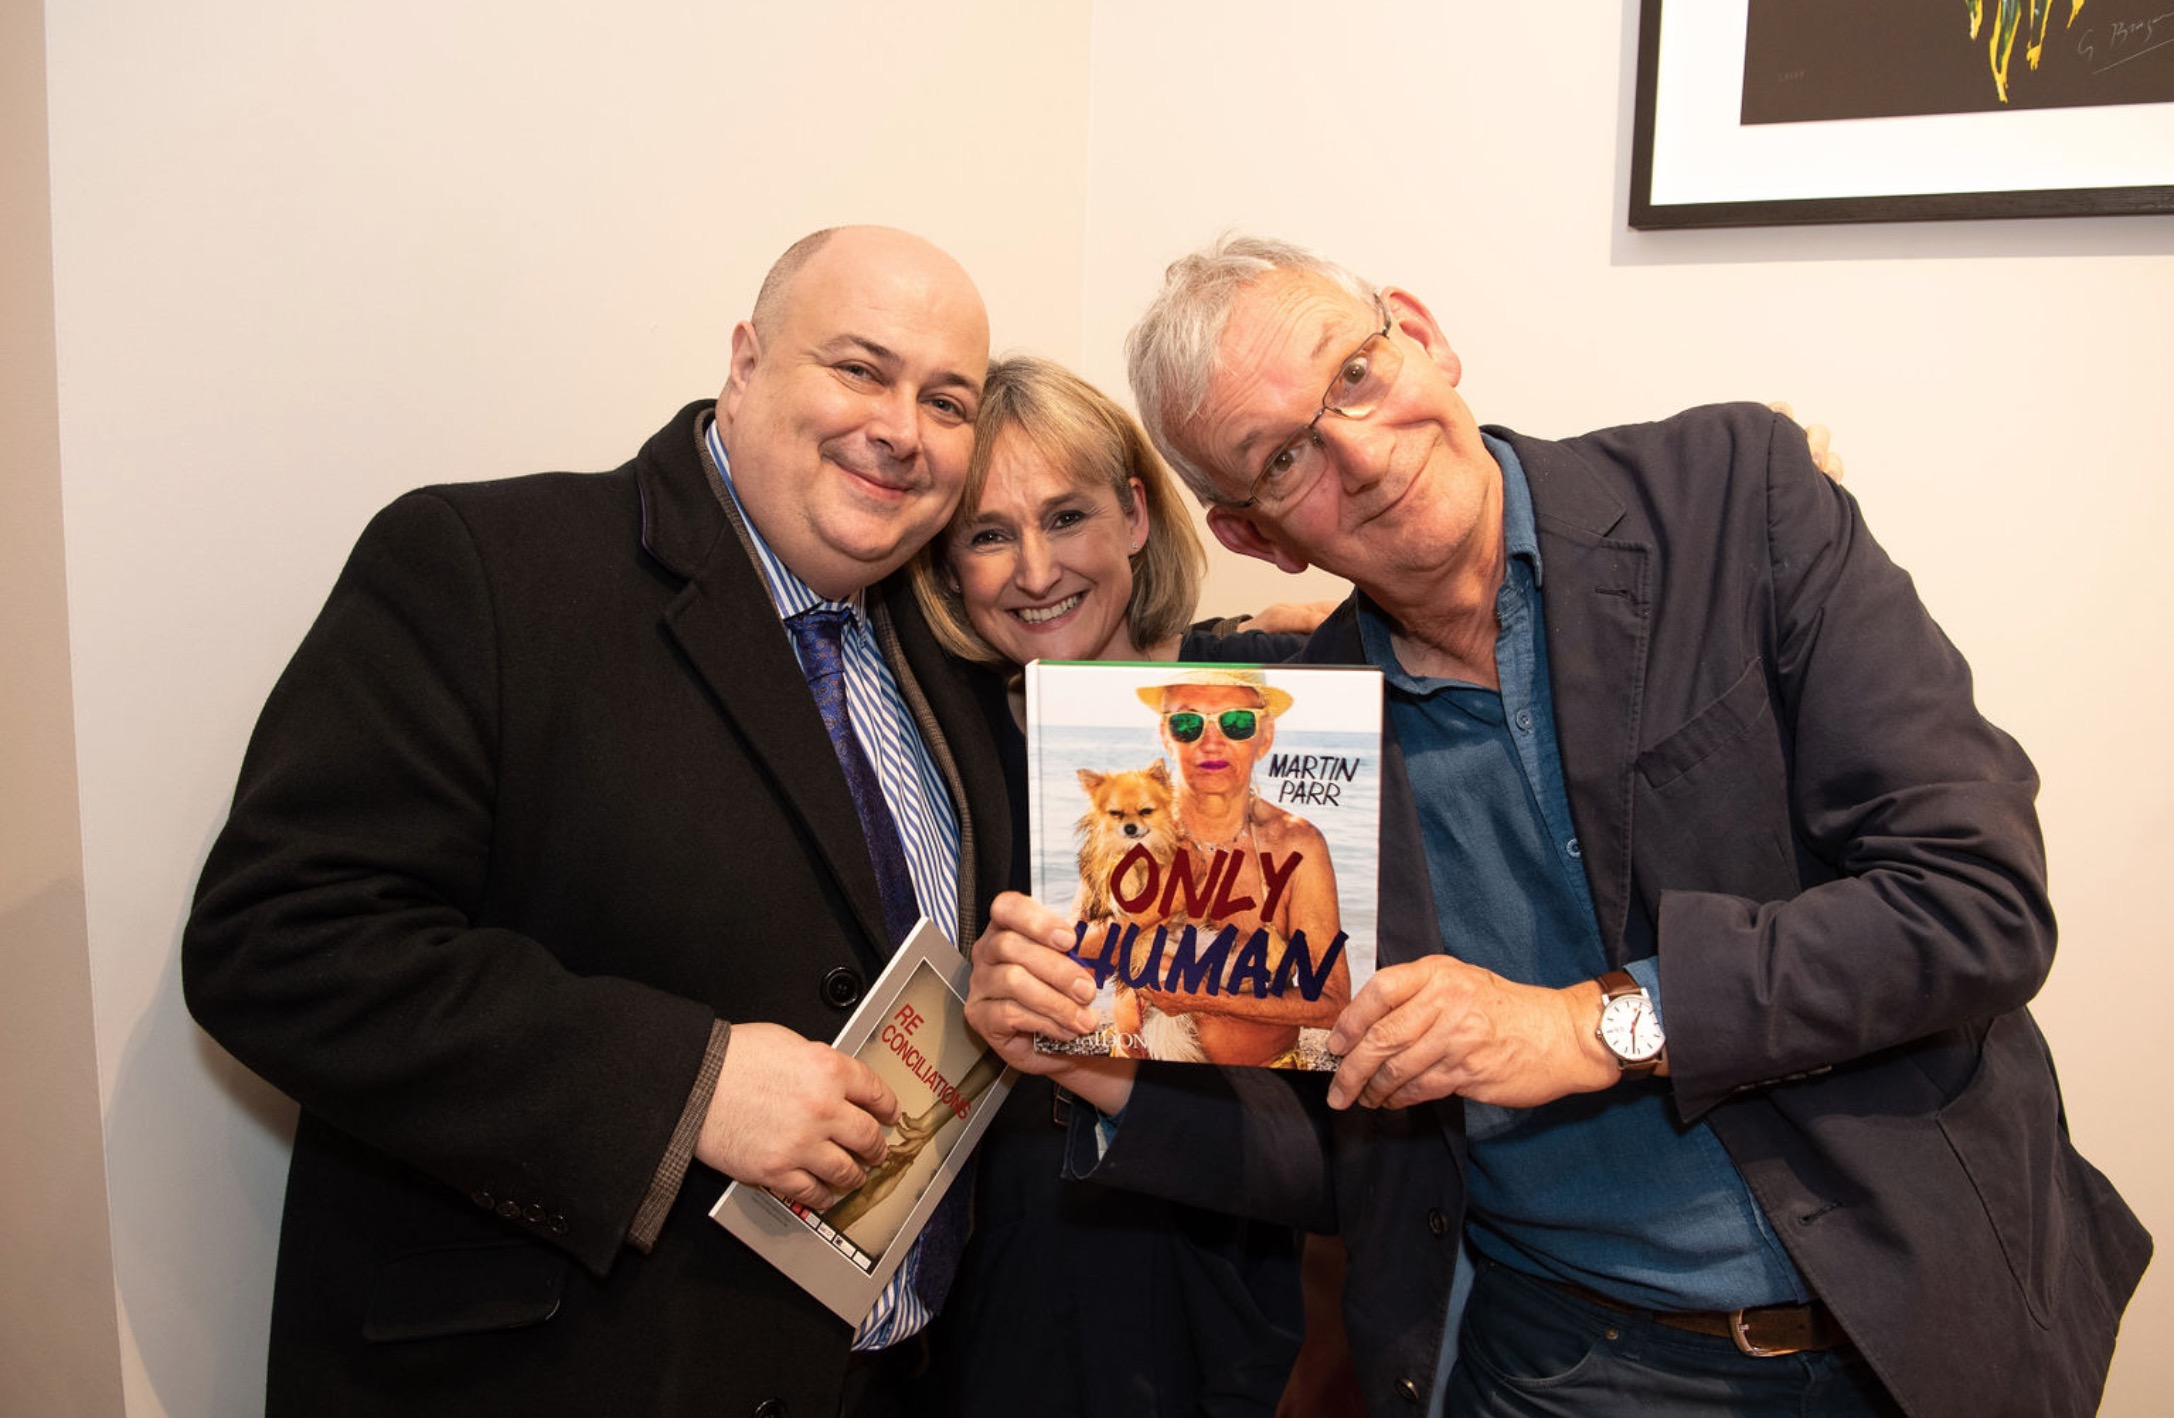 National Portrait Gallery curator Phillip Prodger, Phaidon Commissioning Editor Victoria Clarke and Martin Parr Photograph by James Mason